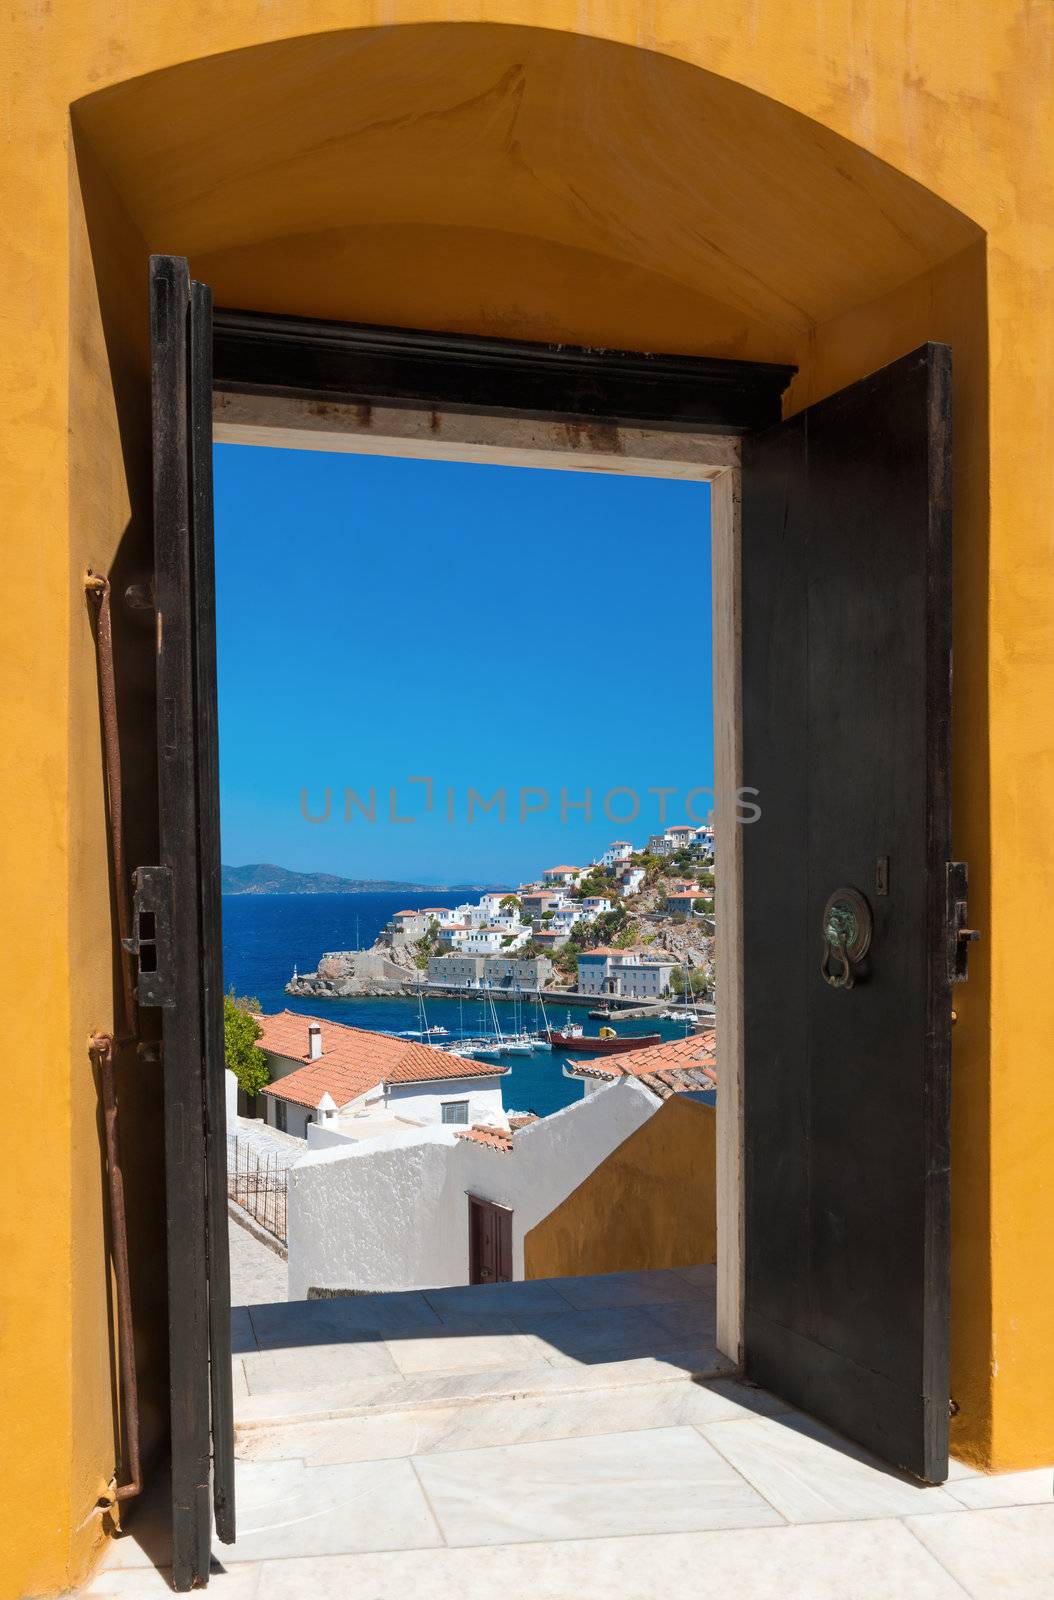 View of the port of the island of Hydra, Greece, as seen through an open door